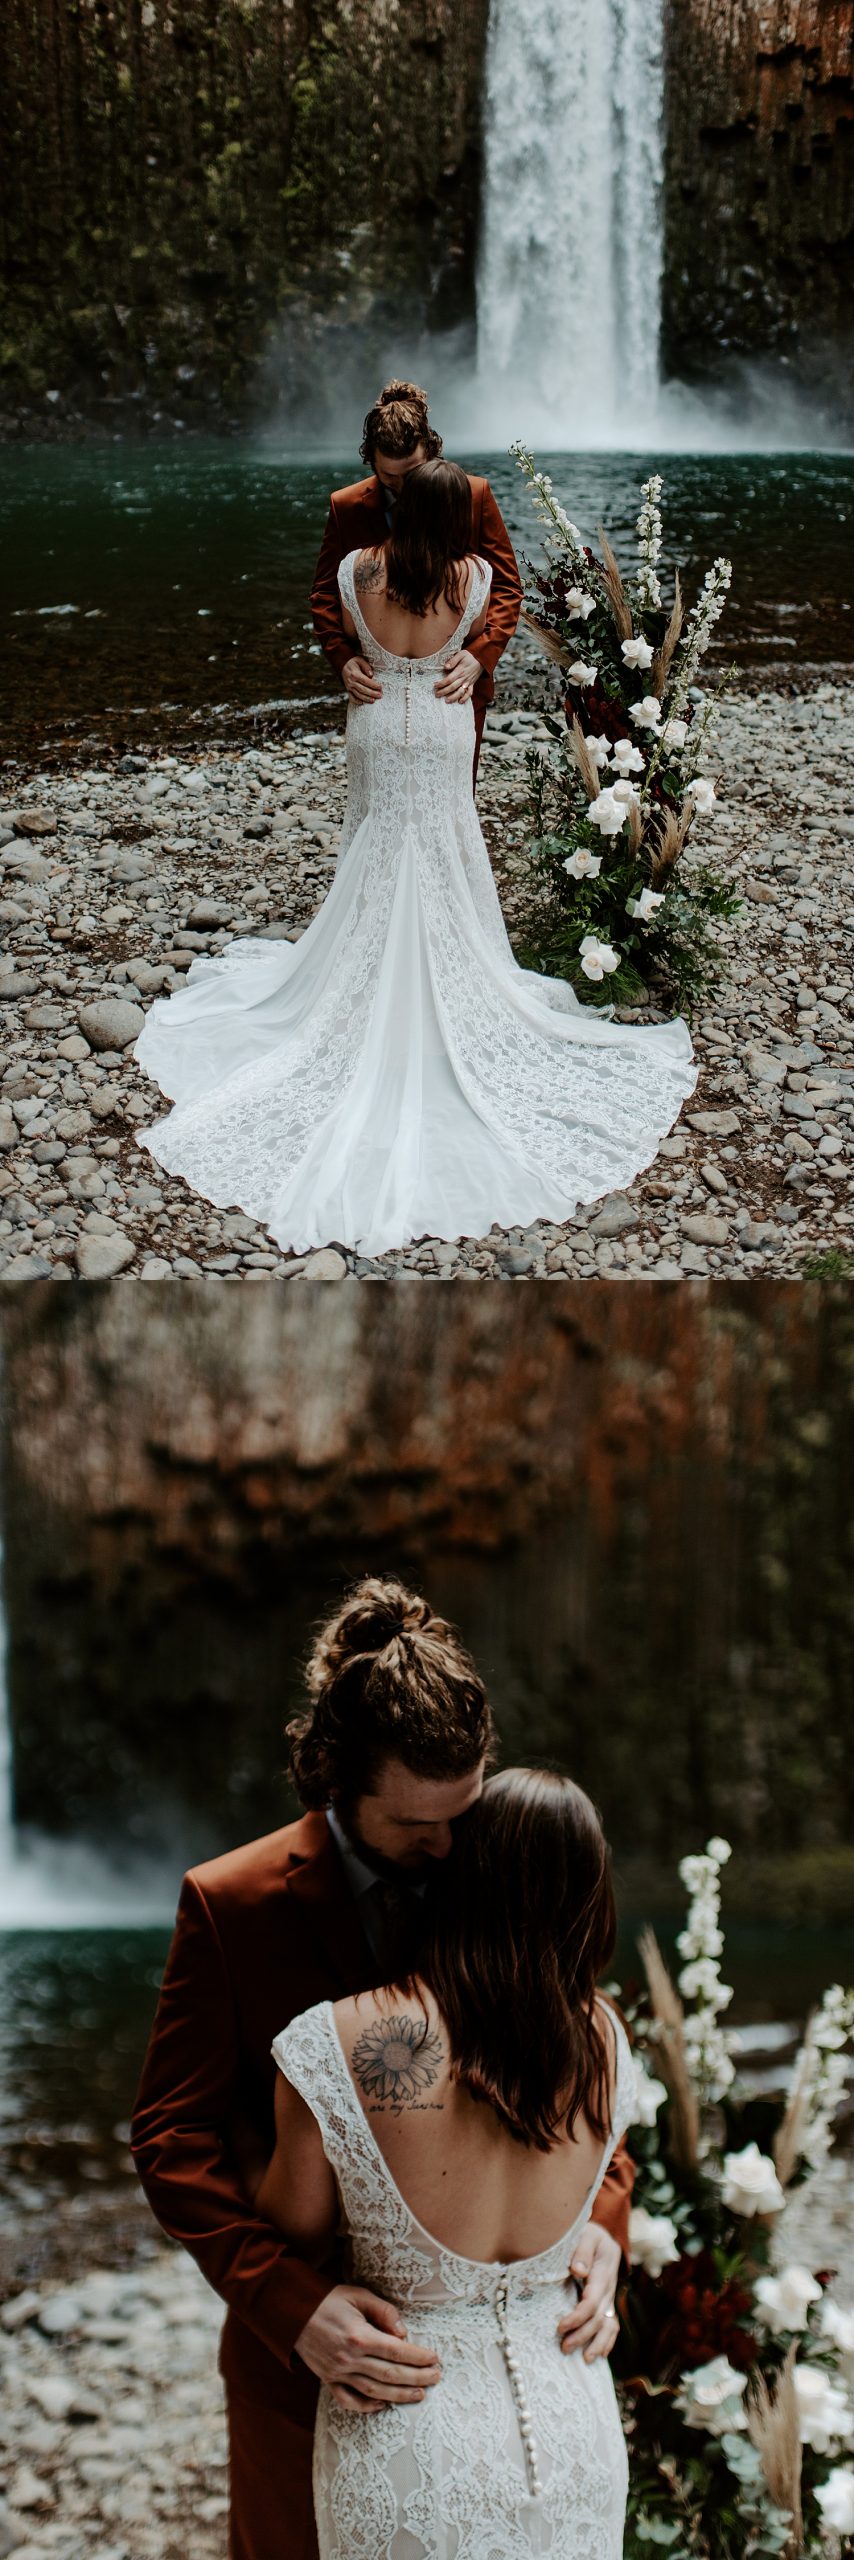 Bride and groom embracing in front of a waterfall with a standing boho floral piece.